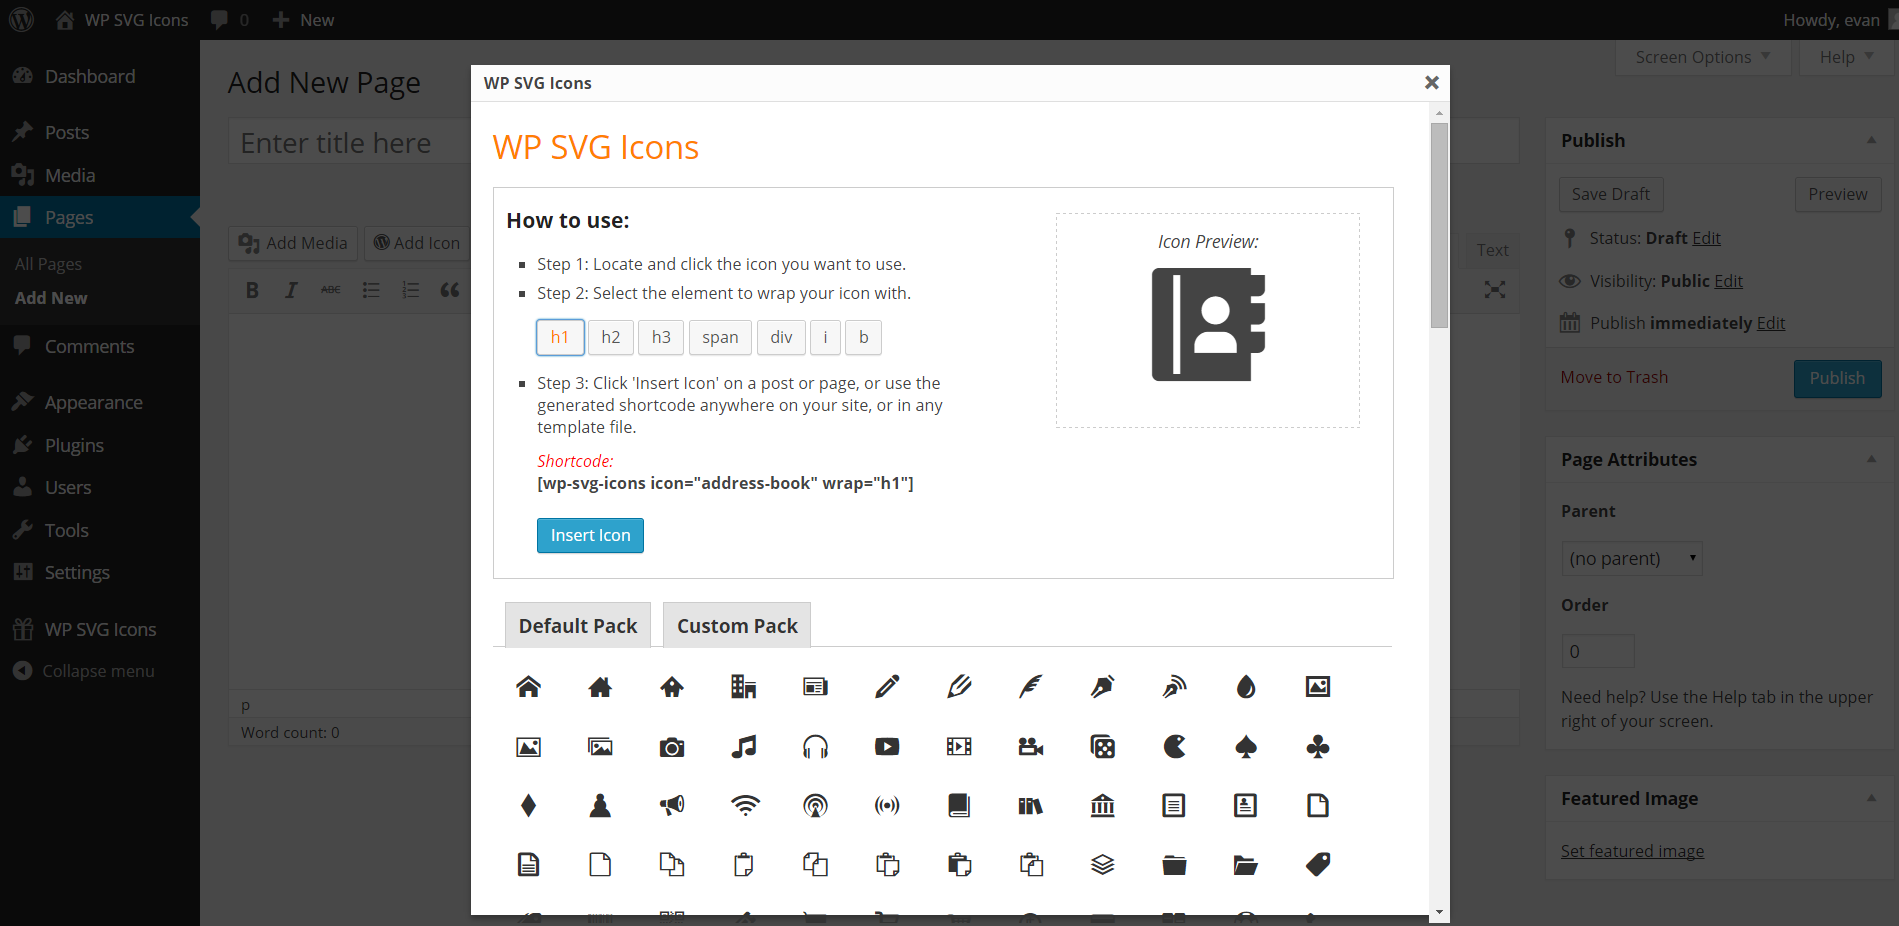 Brand new - generate your shortcode and enter icons into a post or page directly from the edit screen